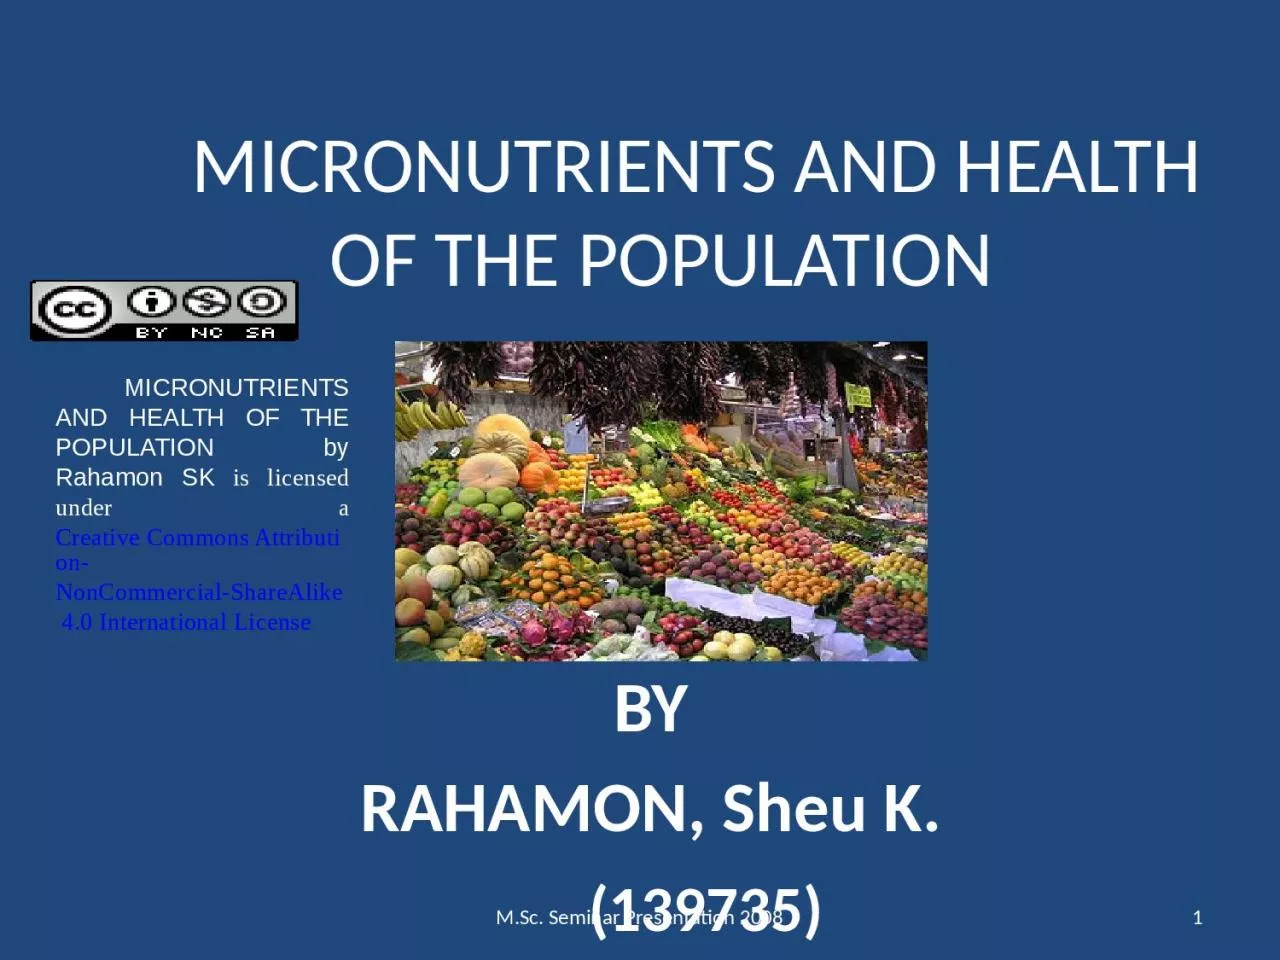 MICRONUTRIENTS AND HEALTH OF THE POPULATION